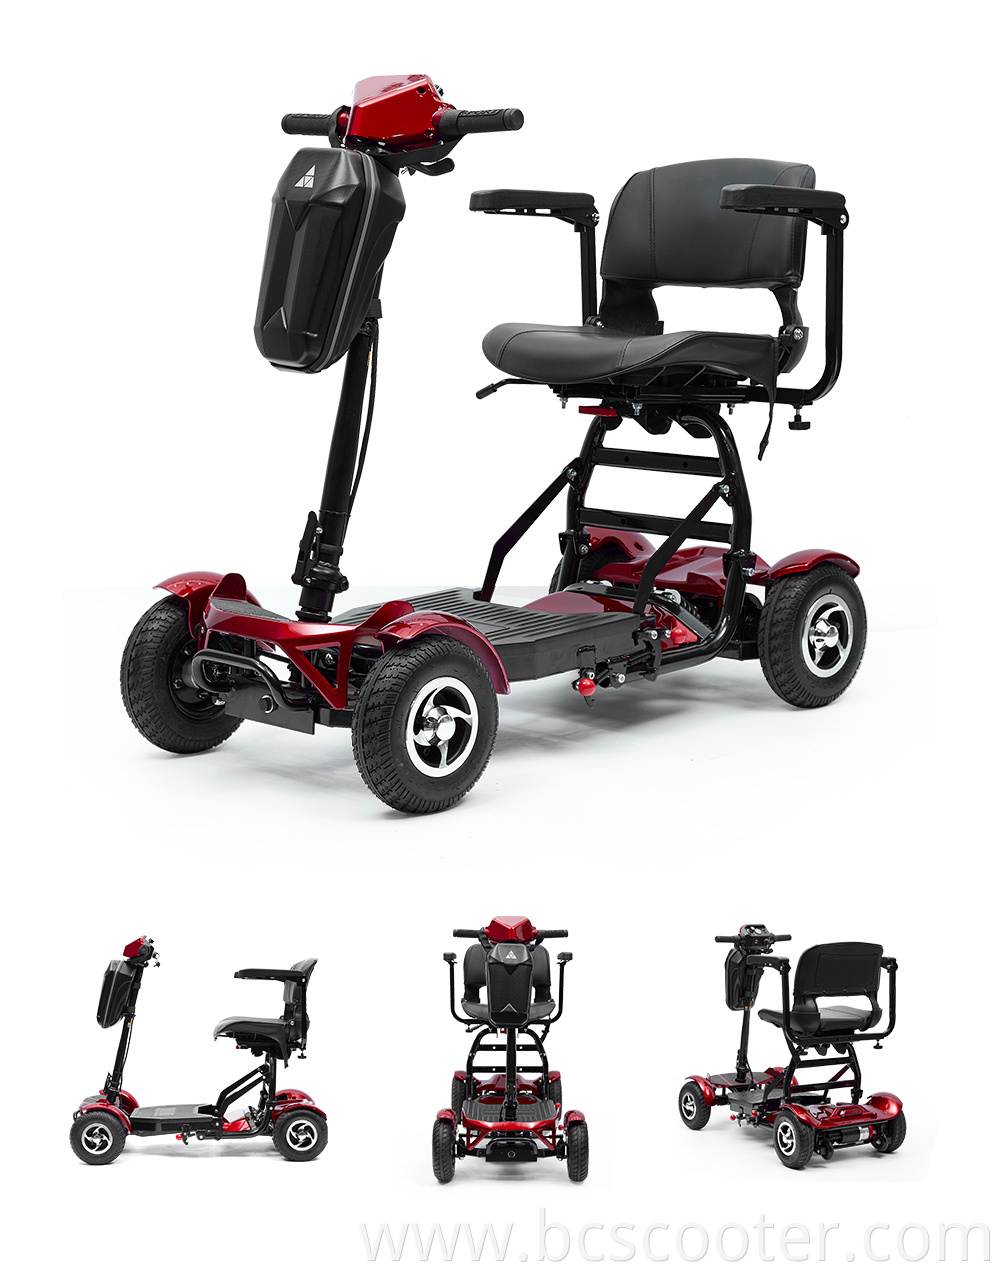 Baichen Bc Ms309 Hot Sell 200w 500w Elderly Mobility Scooter 4 Wheel Electric For Disabled With 7 9 10 13 Wheels